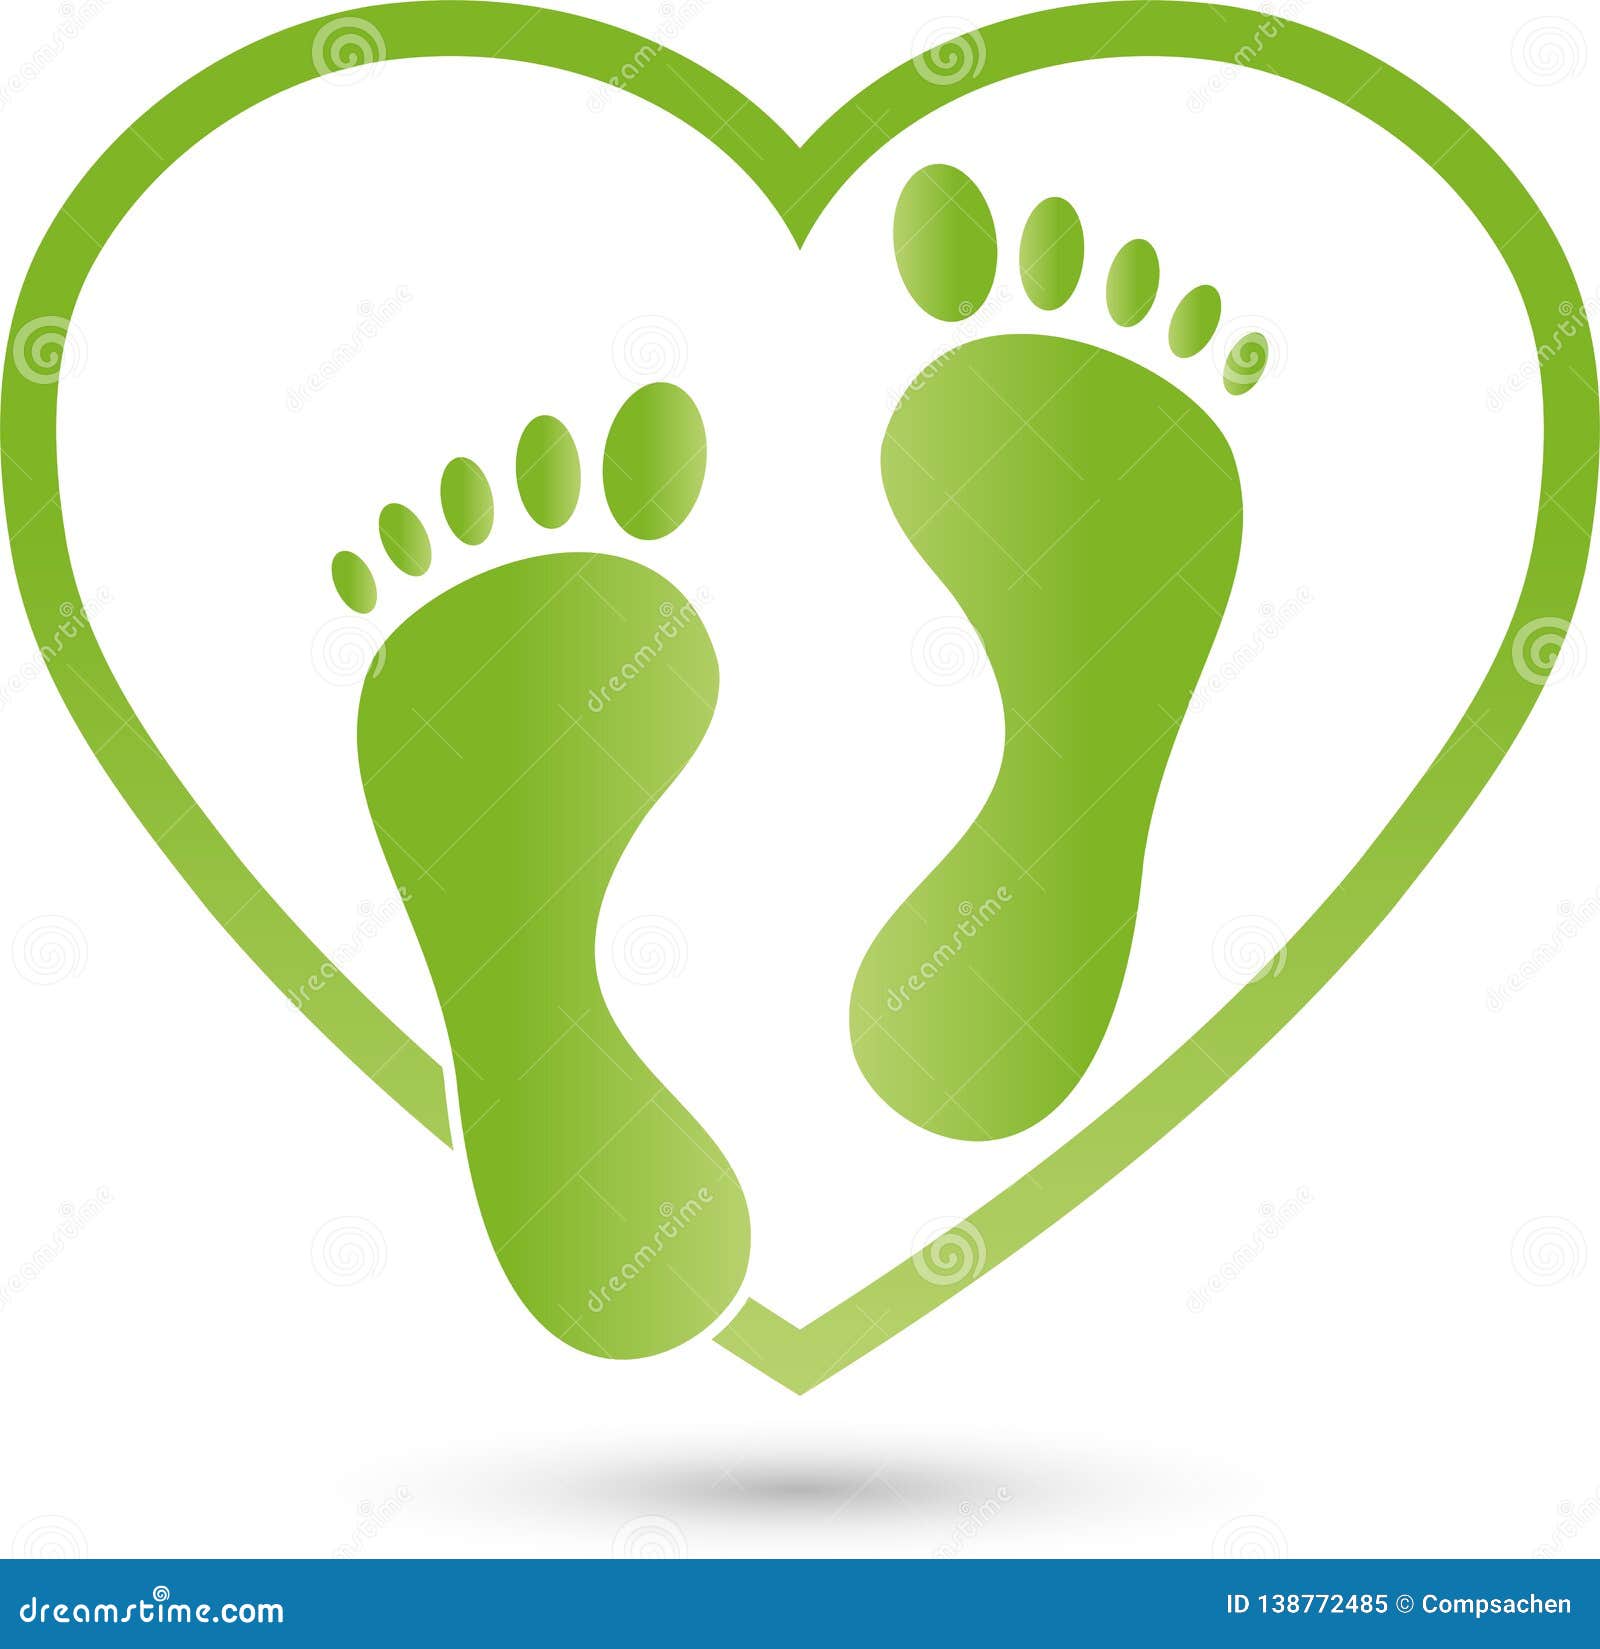 two feet and heart, two feet, foot care and podiatry logo